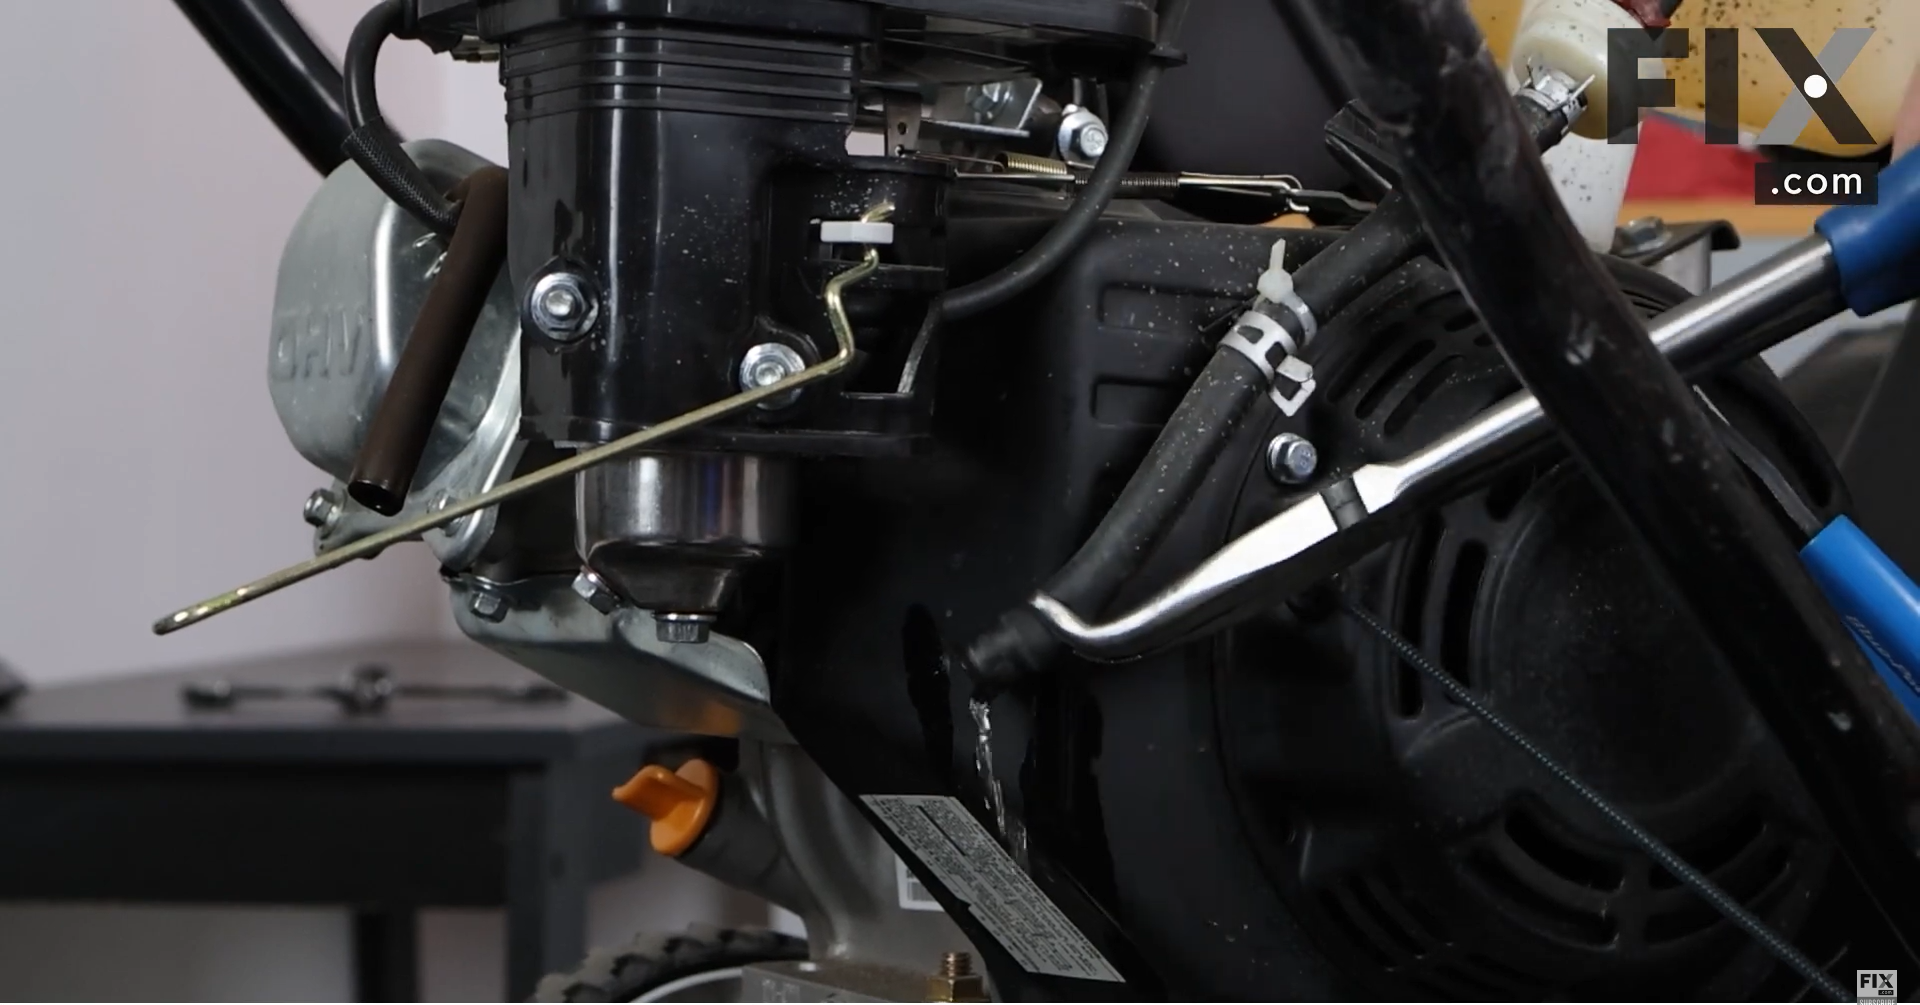 Removing the from Fuel Line from a Single Stage Snowblower